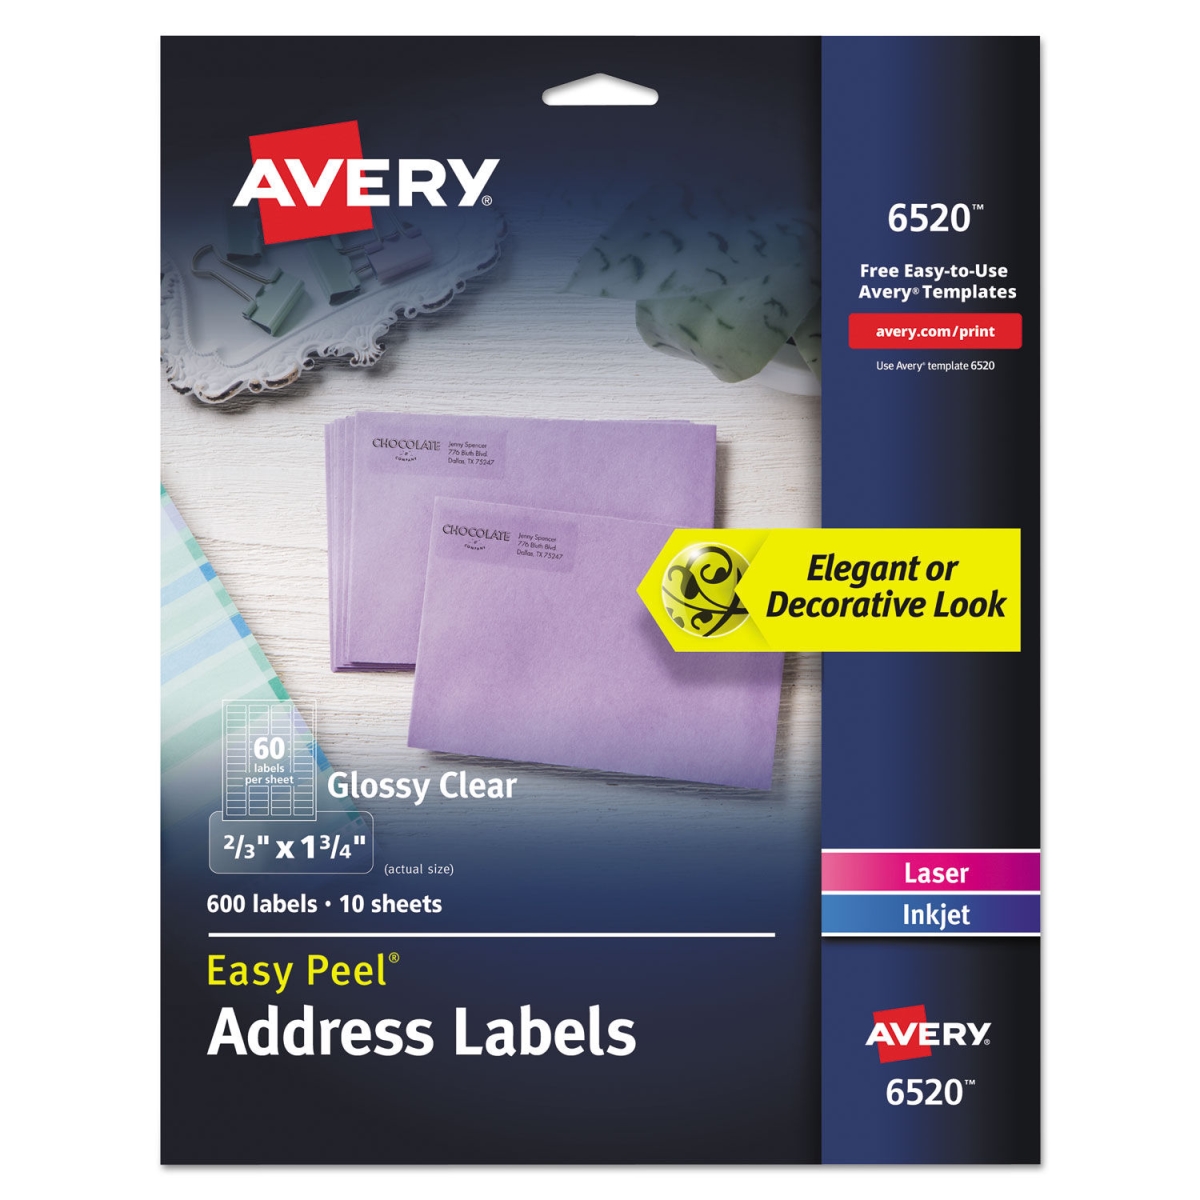 Avery-dennison Ave6520 0.6 X 1.75 In. Glossy Clear Easy Peel Mailing Labels, 60 Per Sheet - Pack Of 10